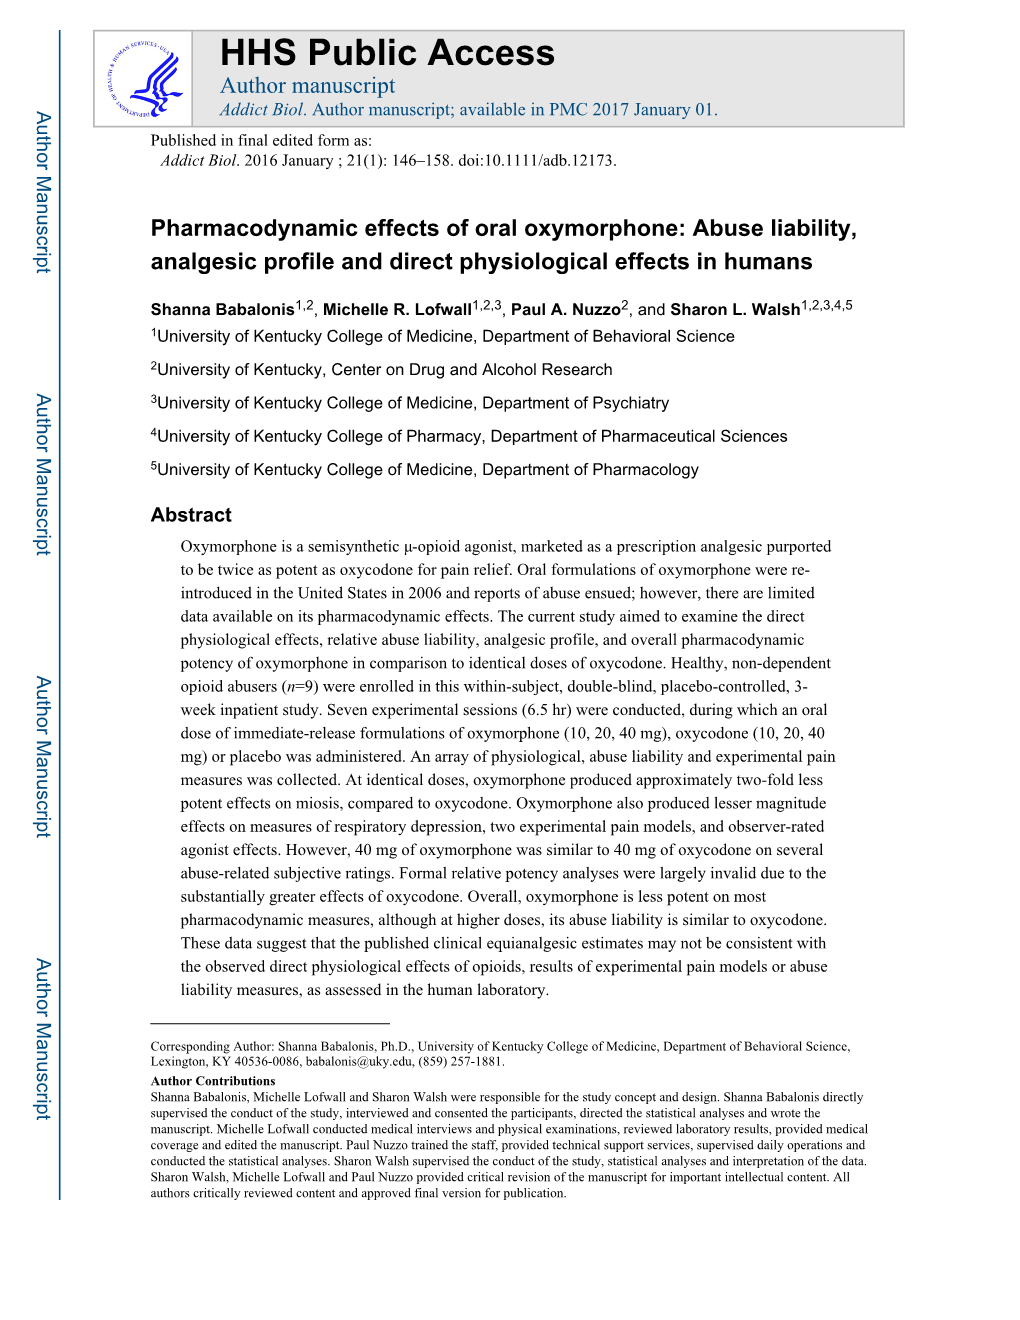 Pharmacodynamic Effects of Oral Oxymorphone: Abuse Liability, Analgesic Profile and Direct Physiological Effects in Humans